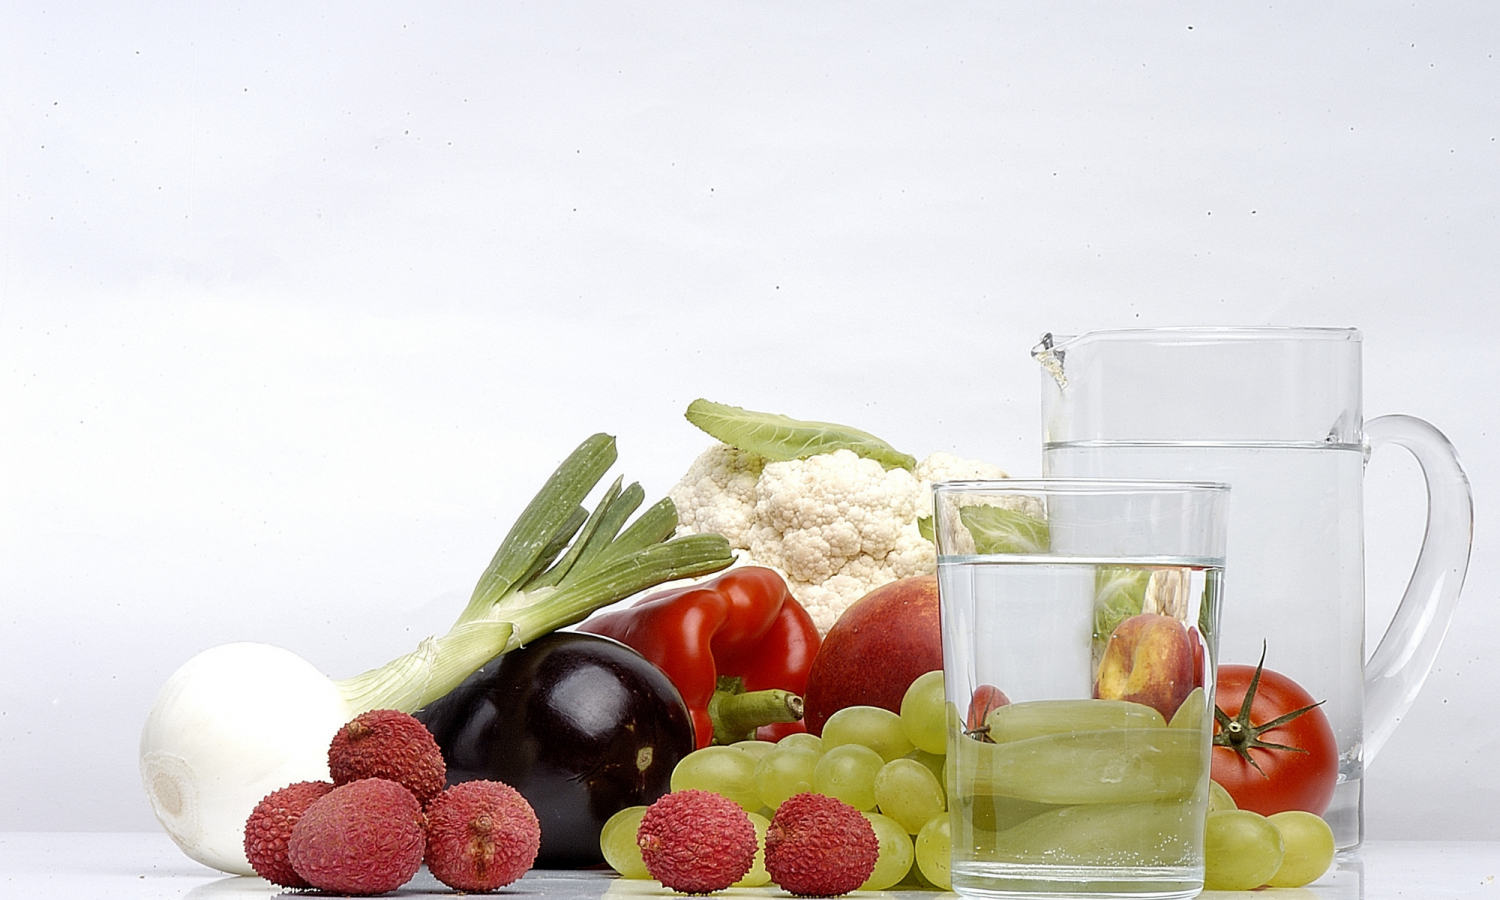 Photo of fruit and vegetables with a jug of water